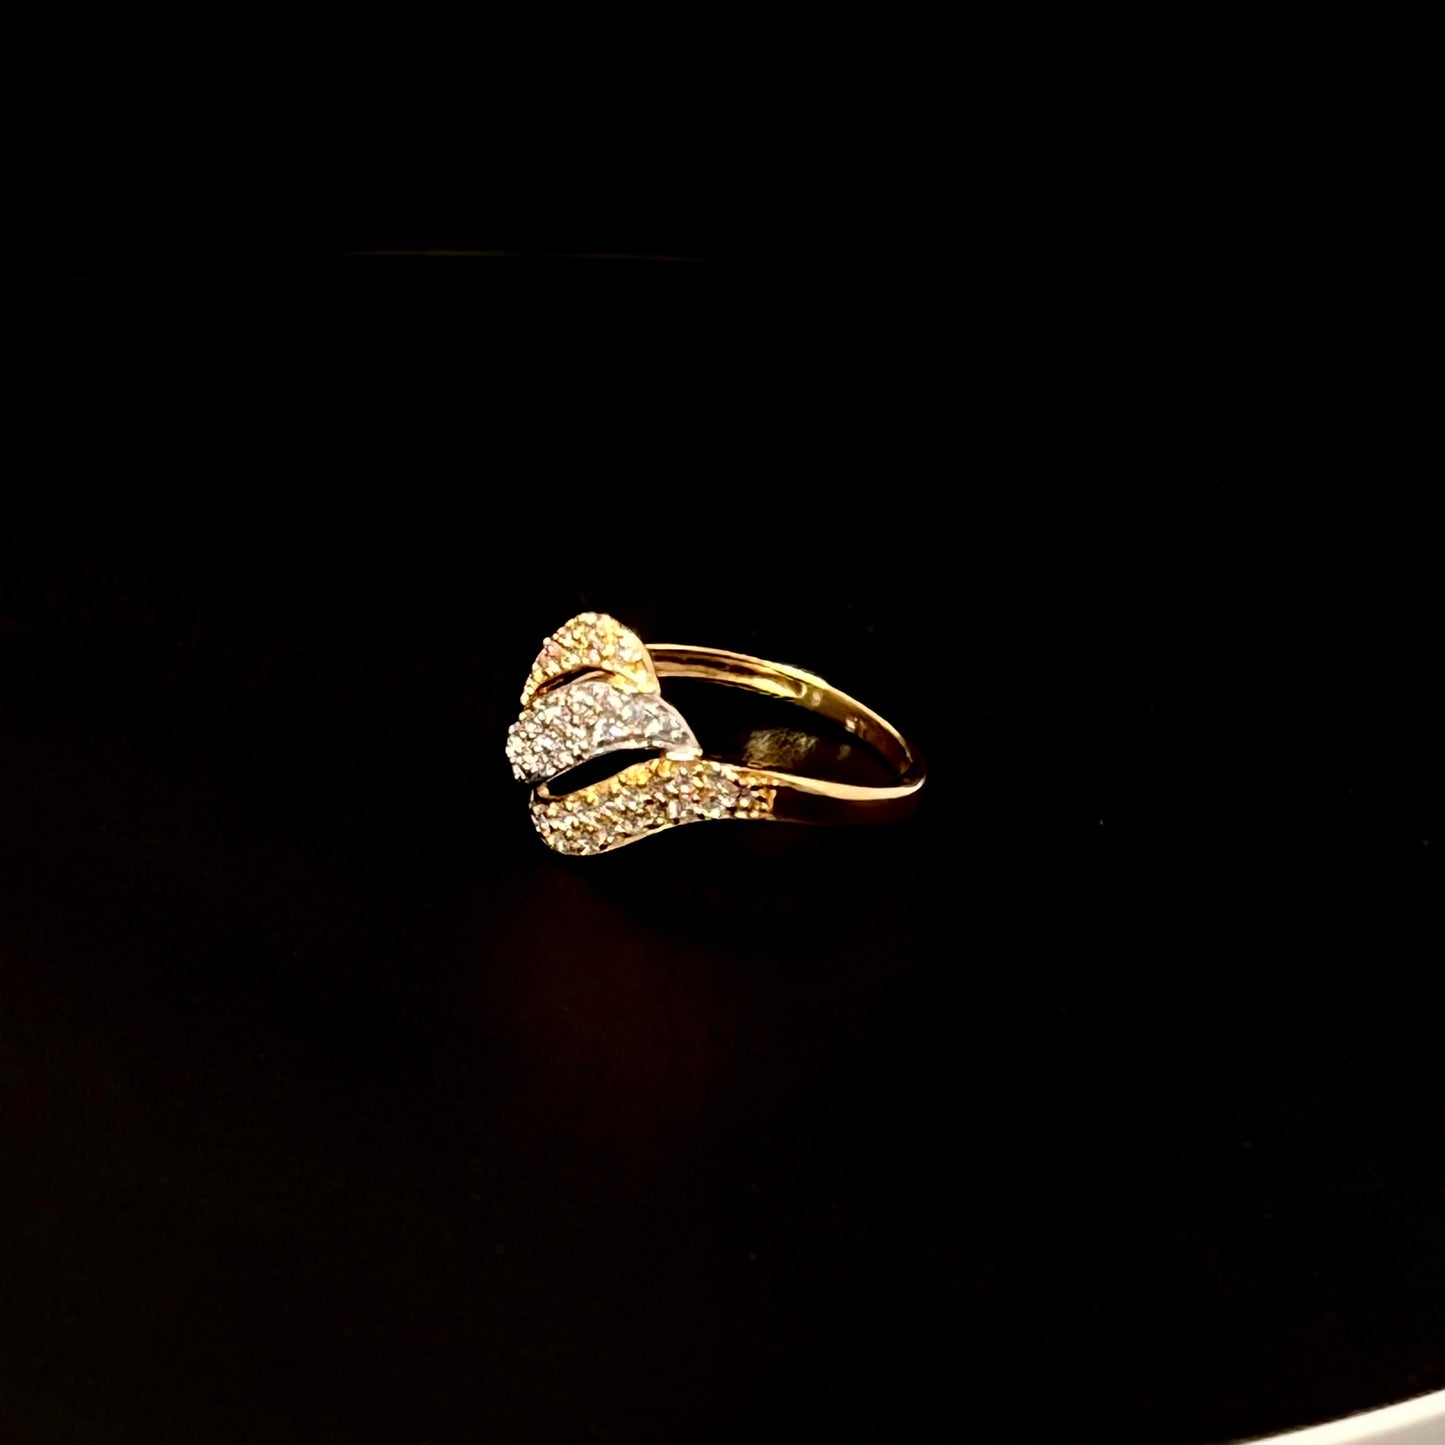 Tri-Layered Gold Ring with Central CZ Stones